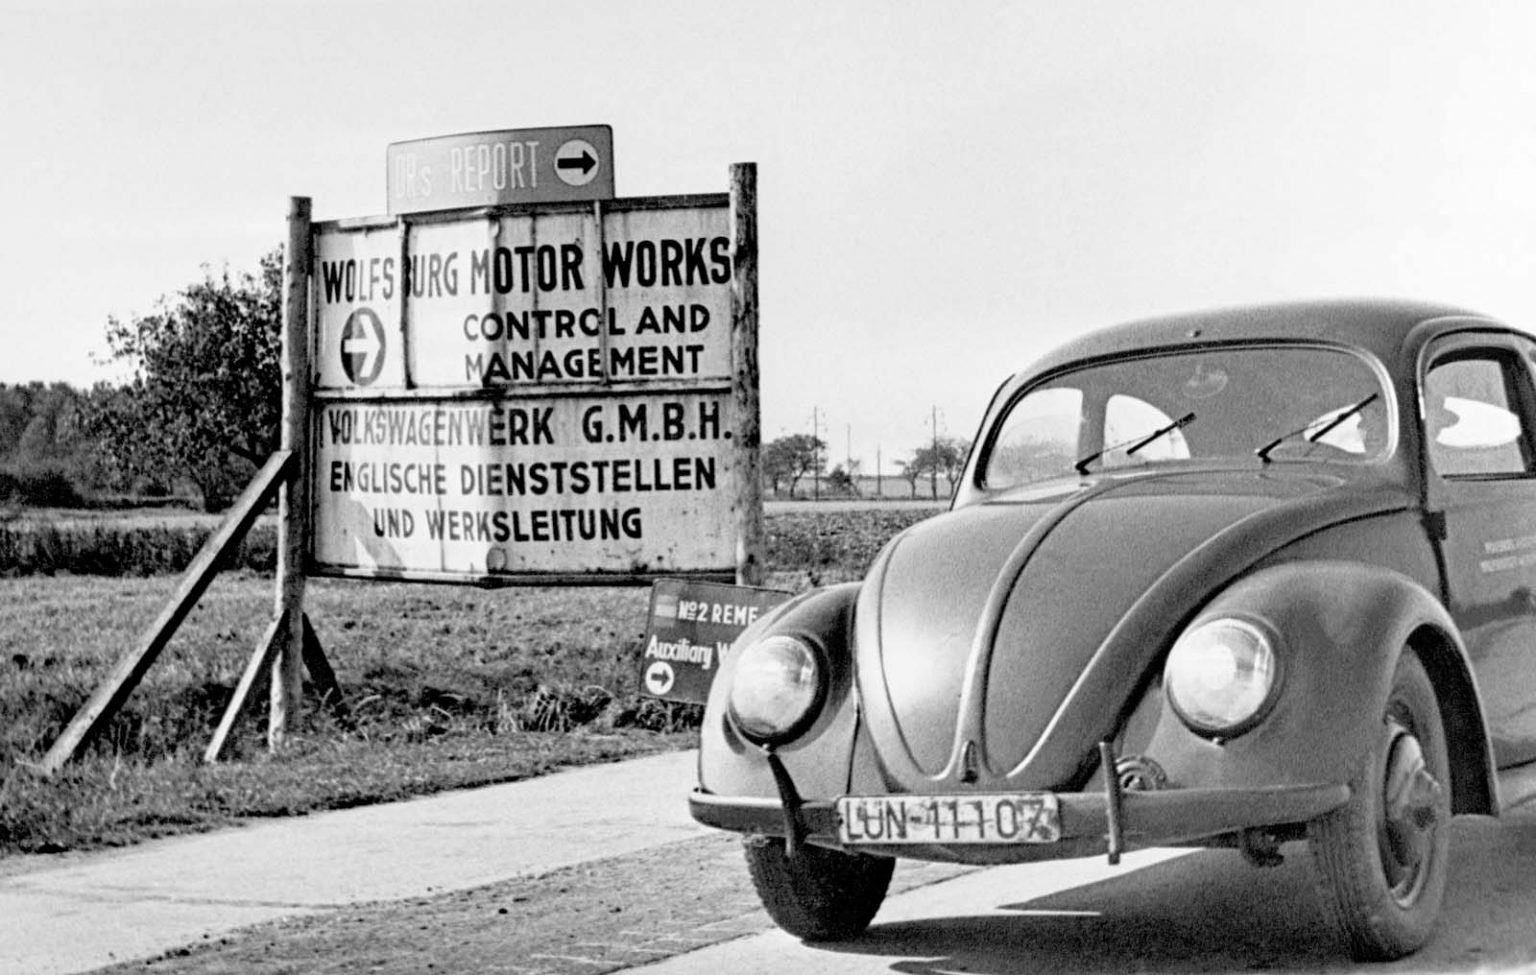 In 1945, the responsibility for the Volkswagen plant was transferred to the British military government. It confiscated the company in accordance with Control Council Act No. 52 and held it in trust until it was handed back to the Germans.